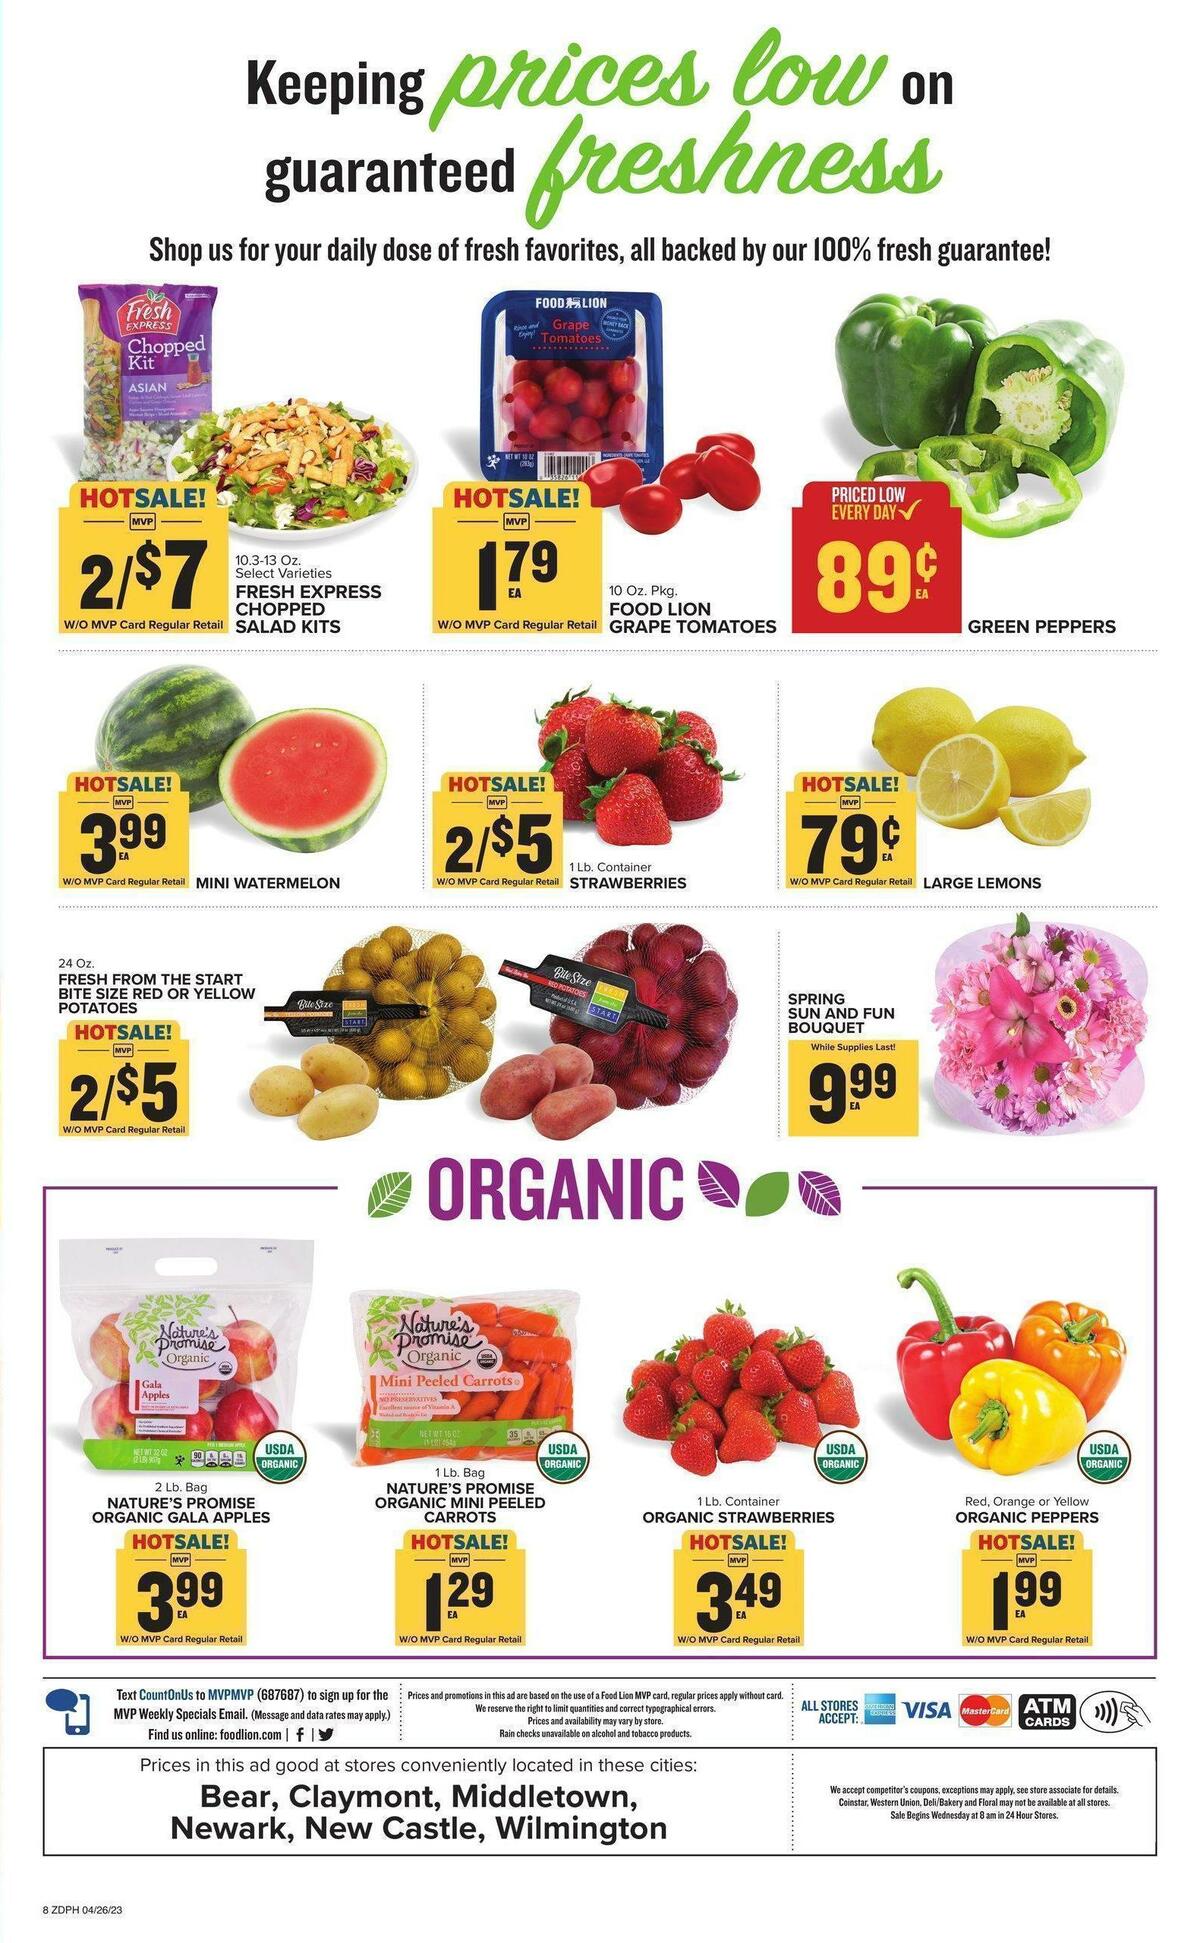 Food Lion Weekly Ad from April 26